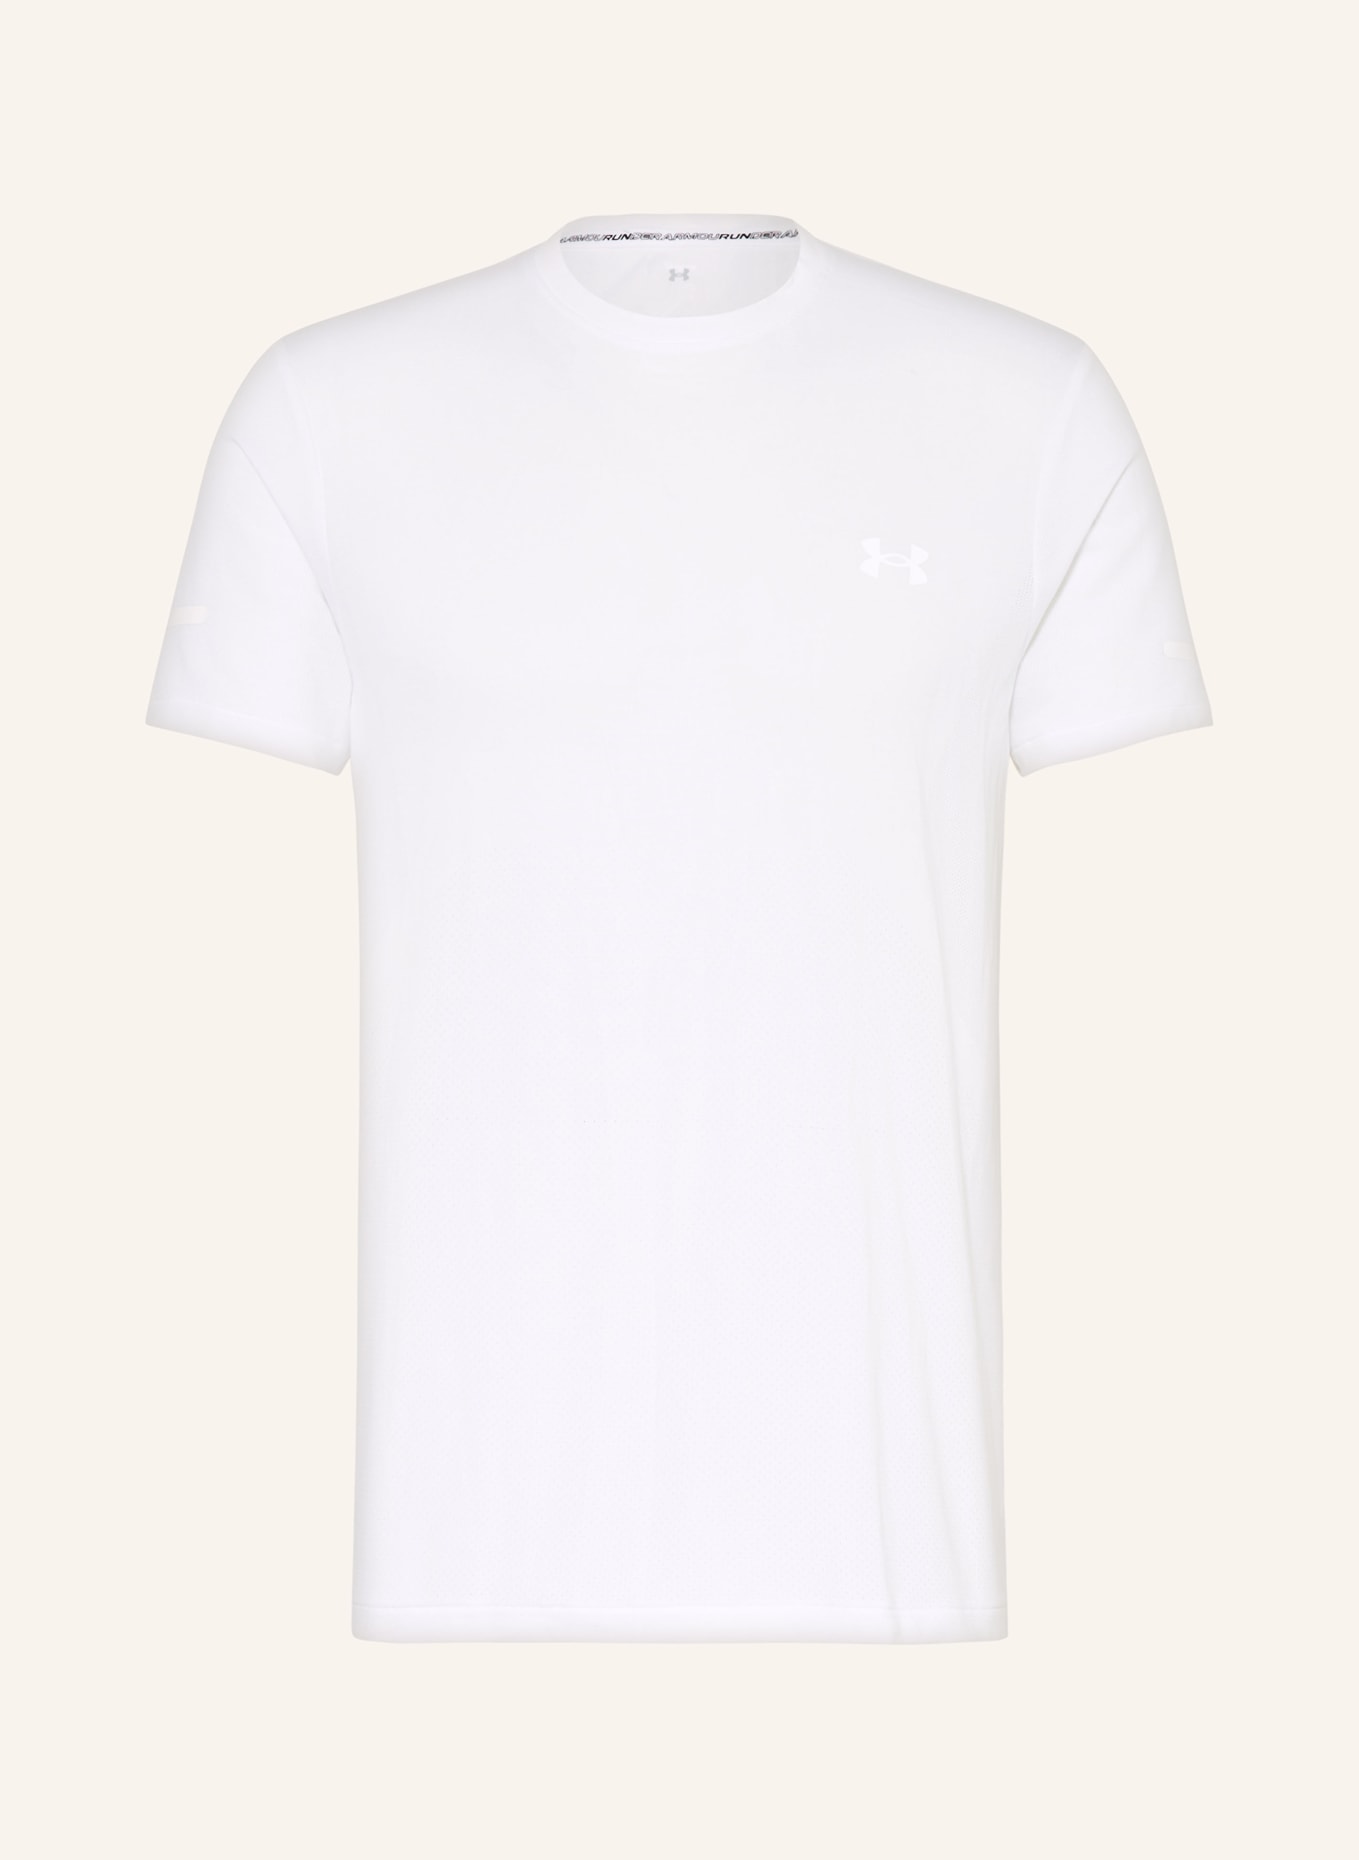 UNDER ARMOUR Running shirt UA SEAMLESS STRIDE, Color: WHITE (Image 1)